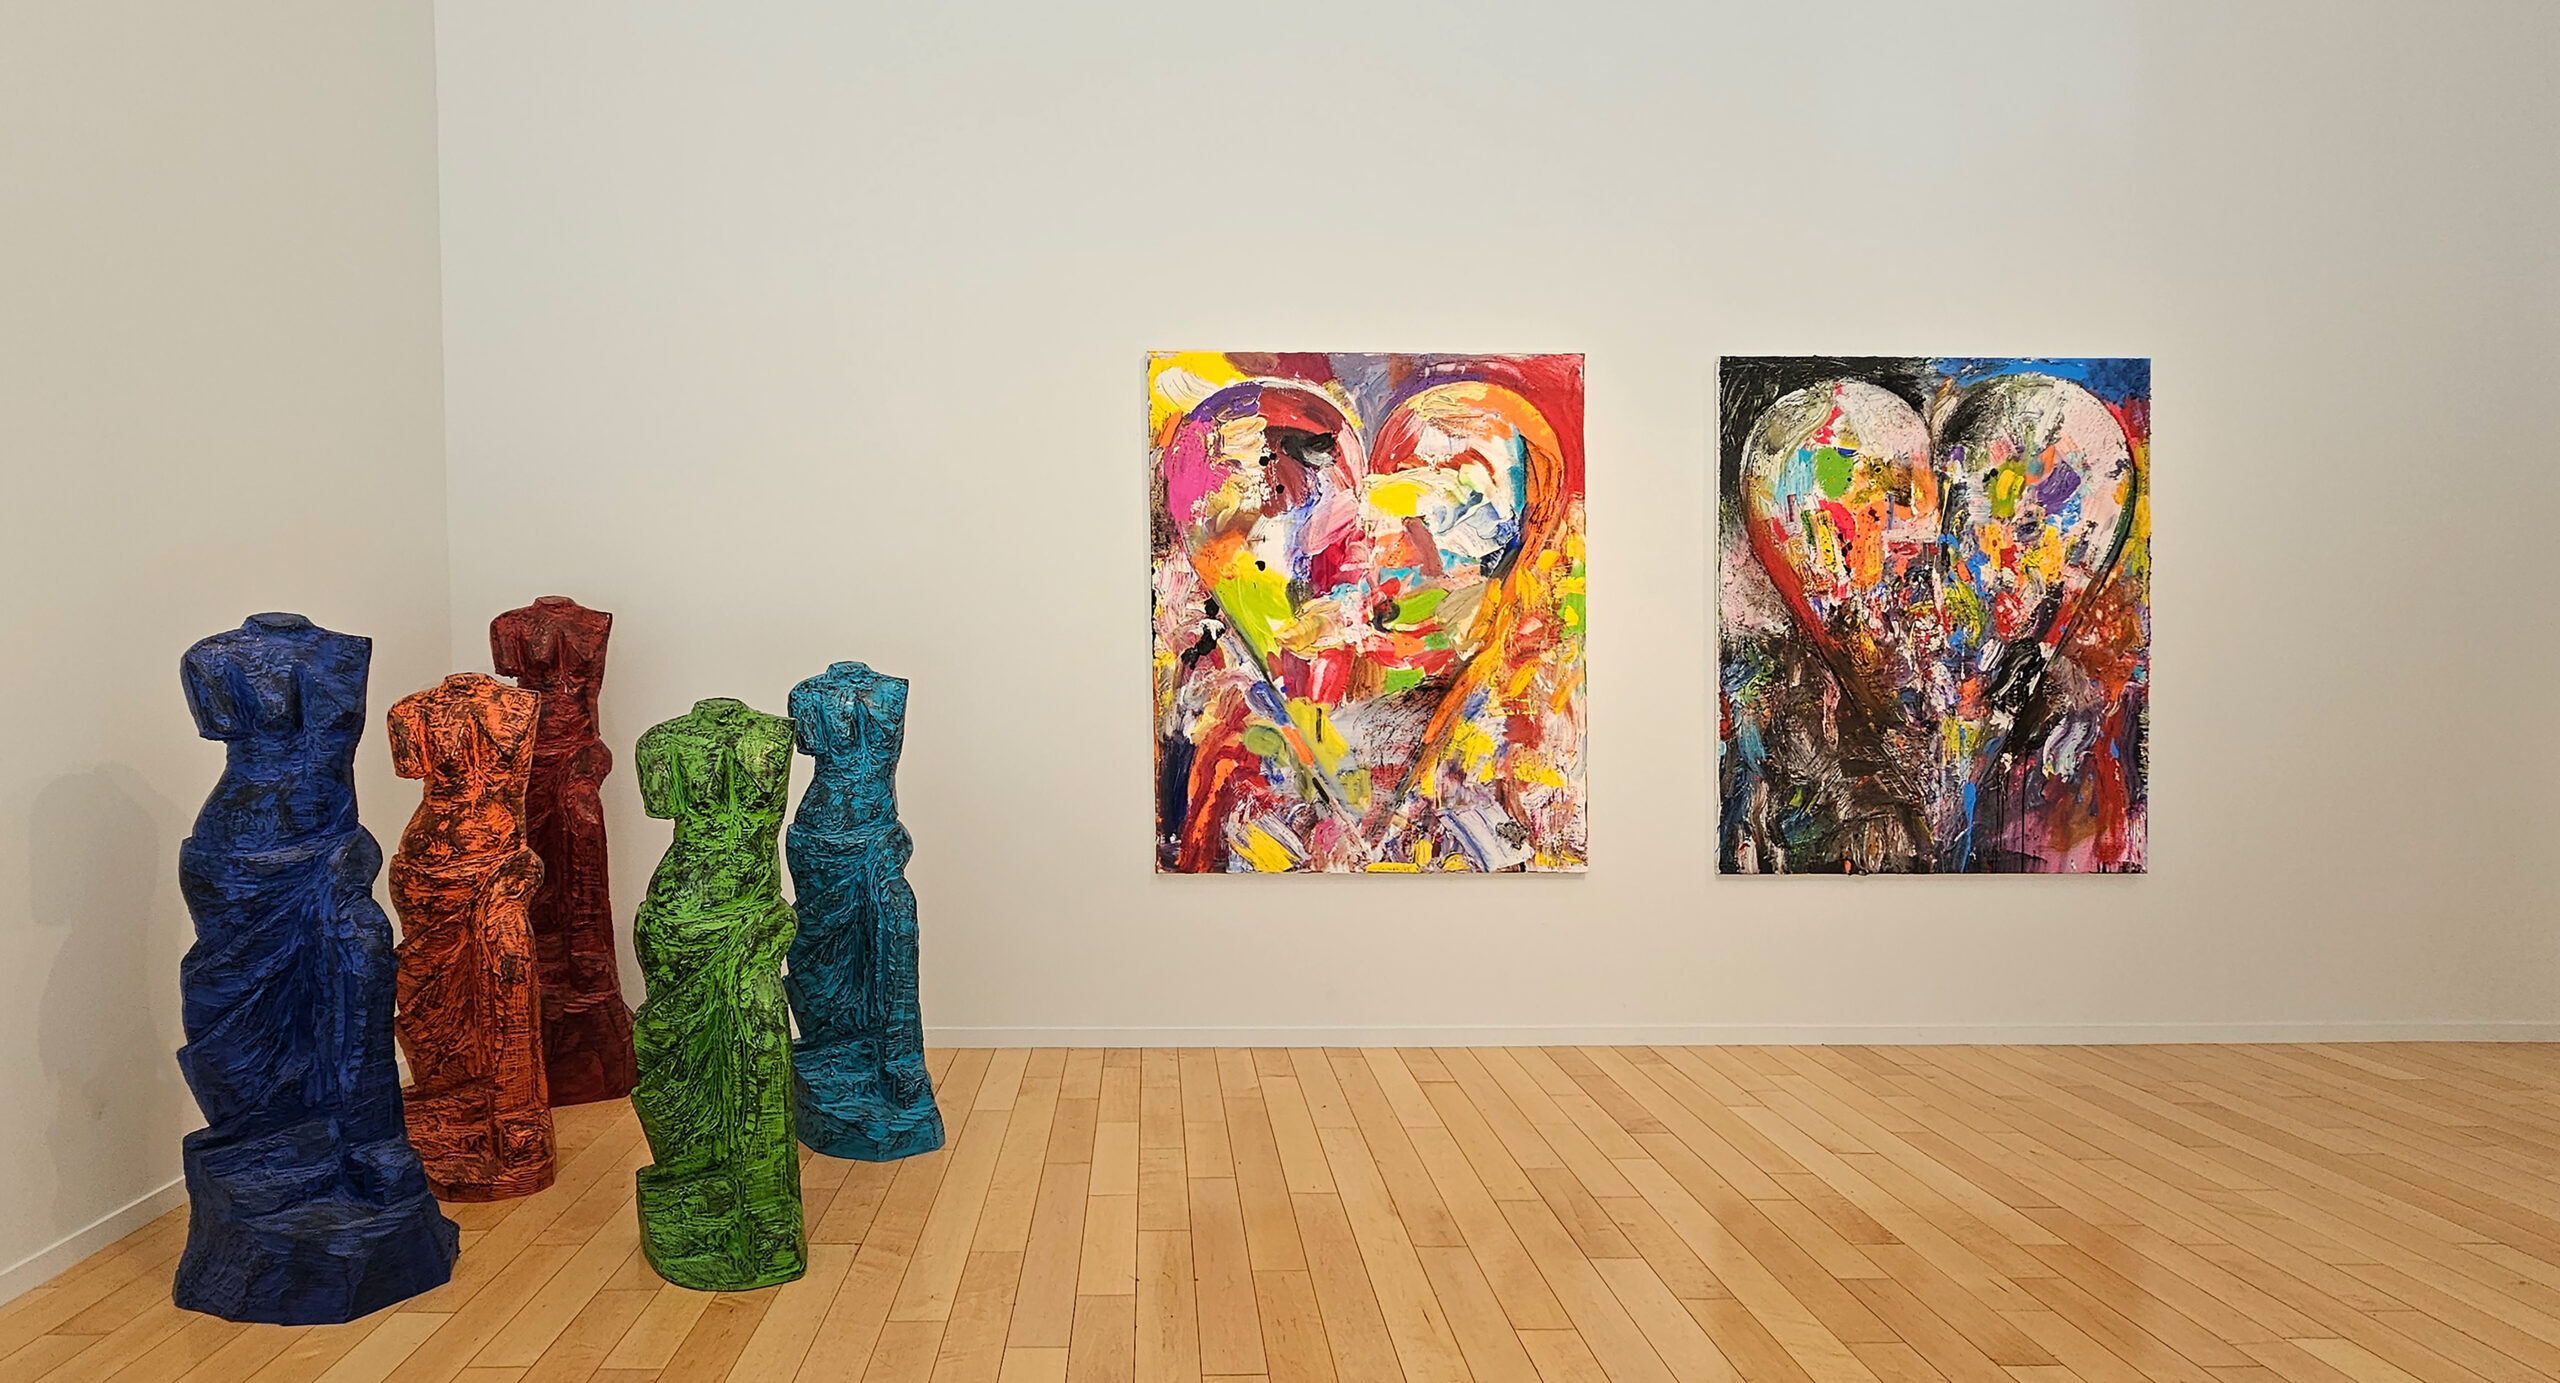 Gallery installation shot with five-part sculpture of Venuses and two paintings of hearts by Jim Dine